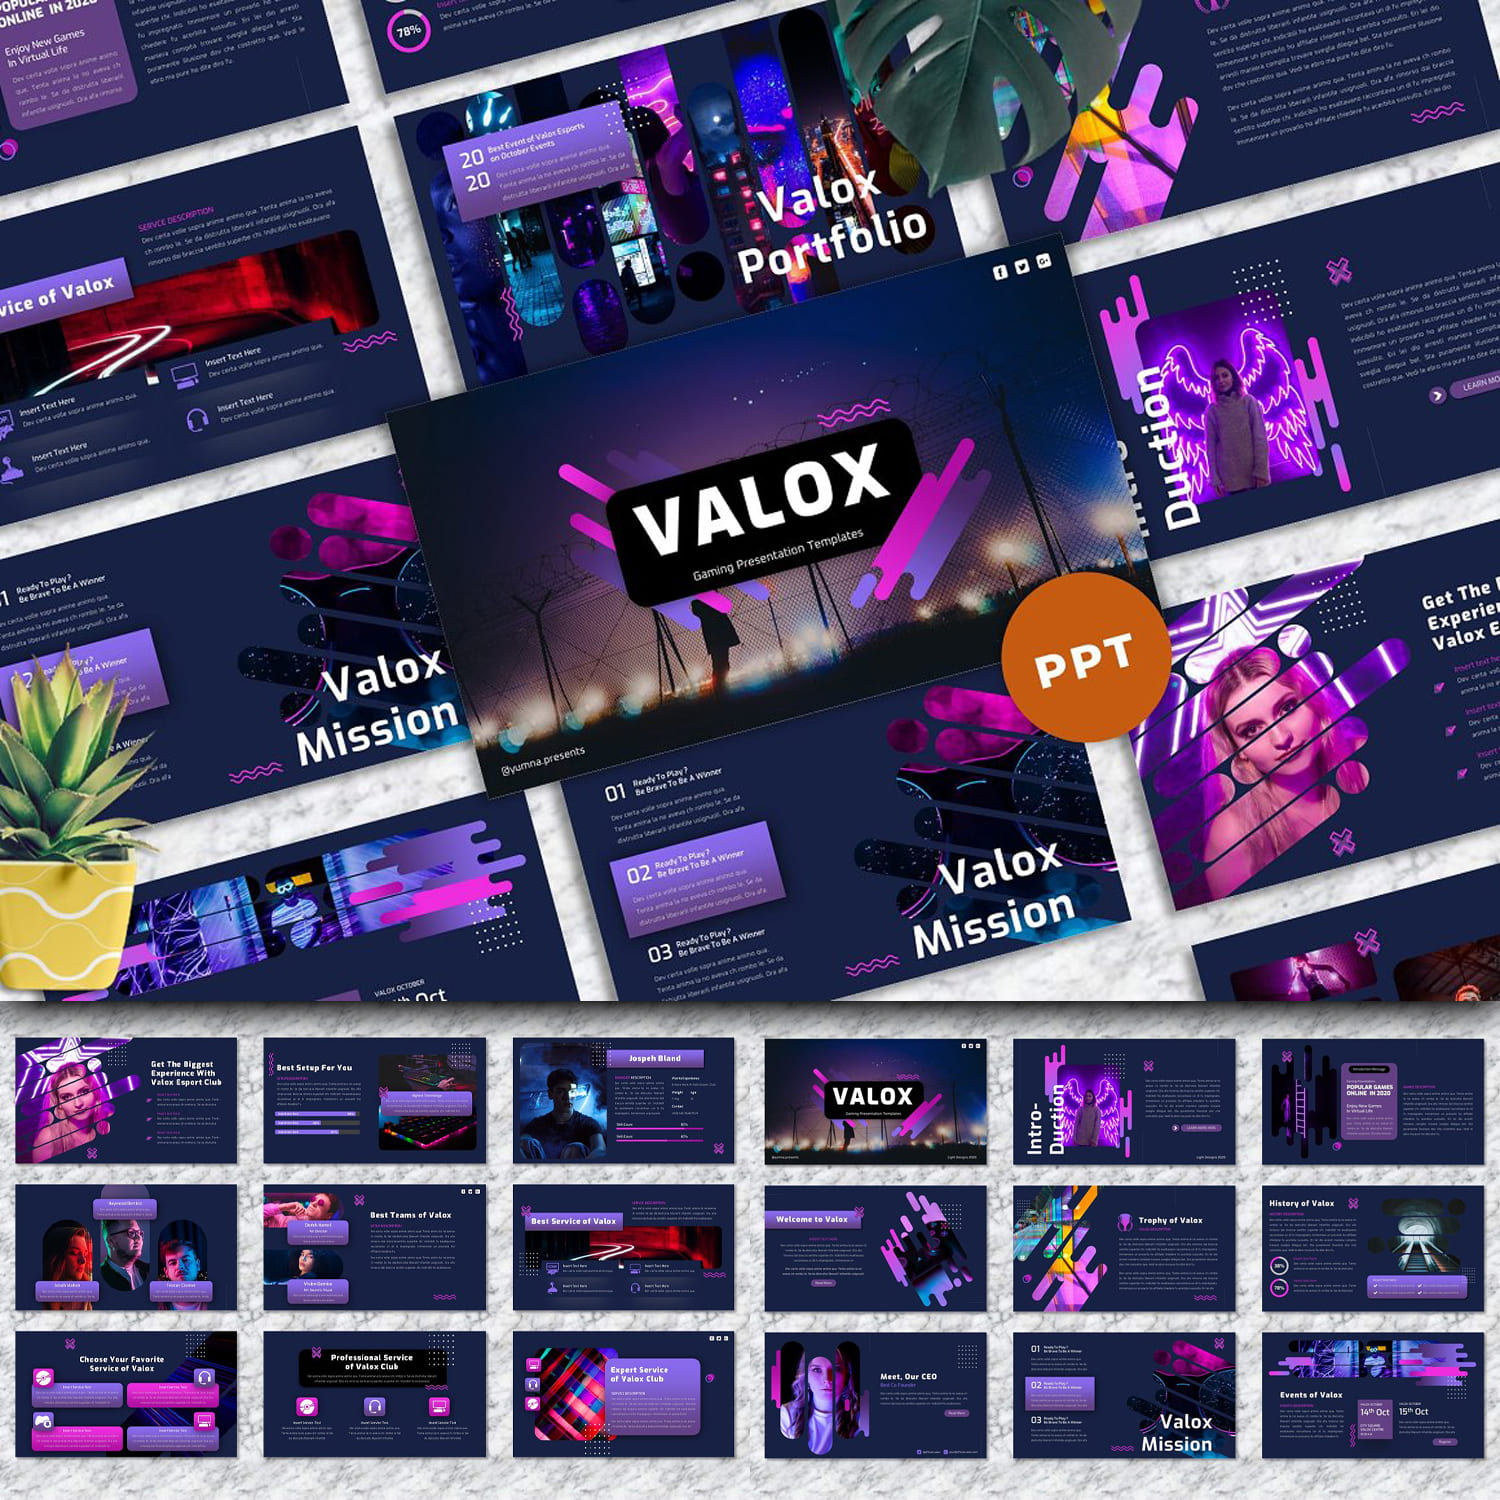 Valox - Gaming Powerpoint Template cover.